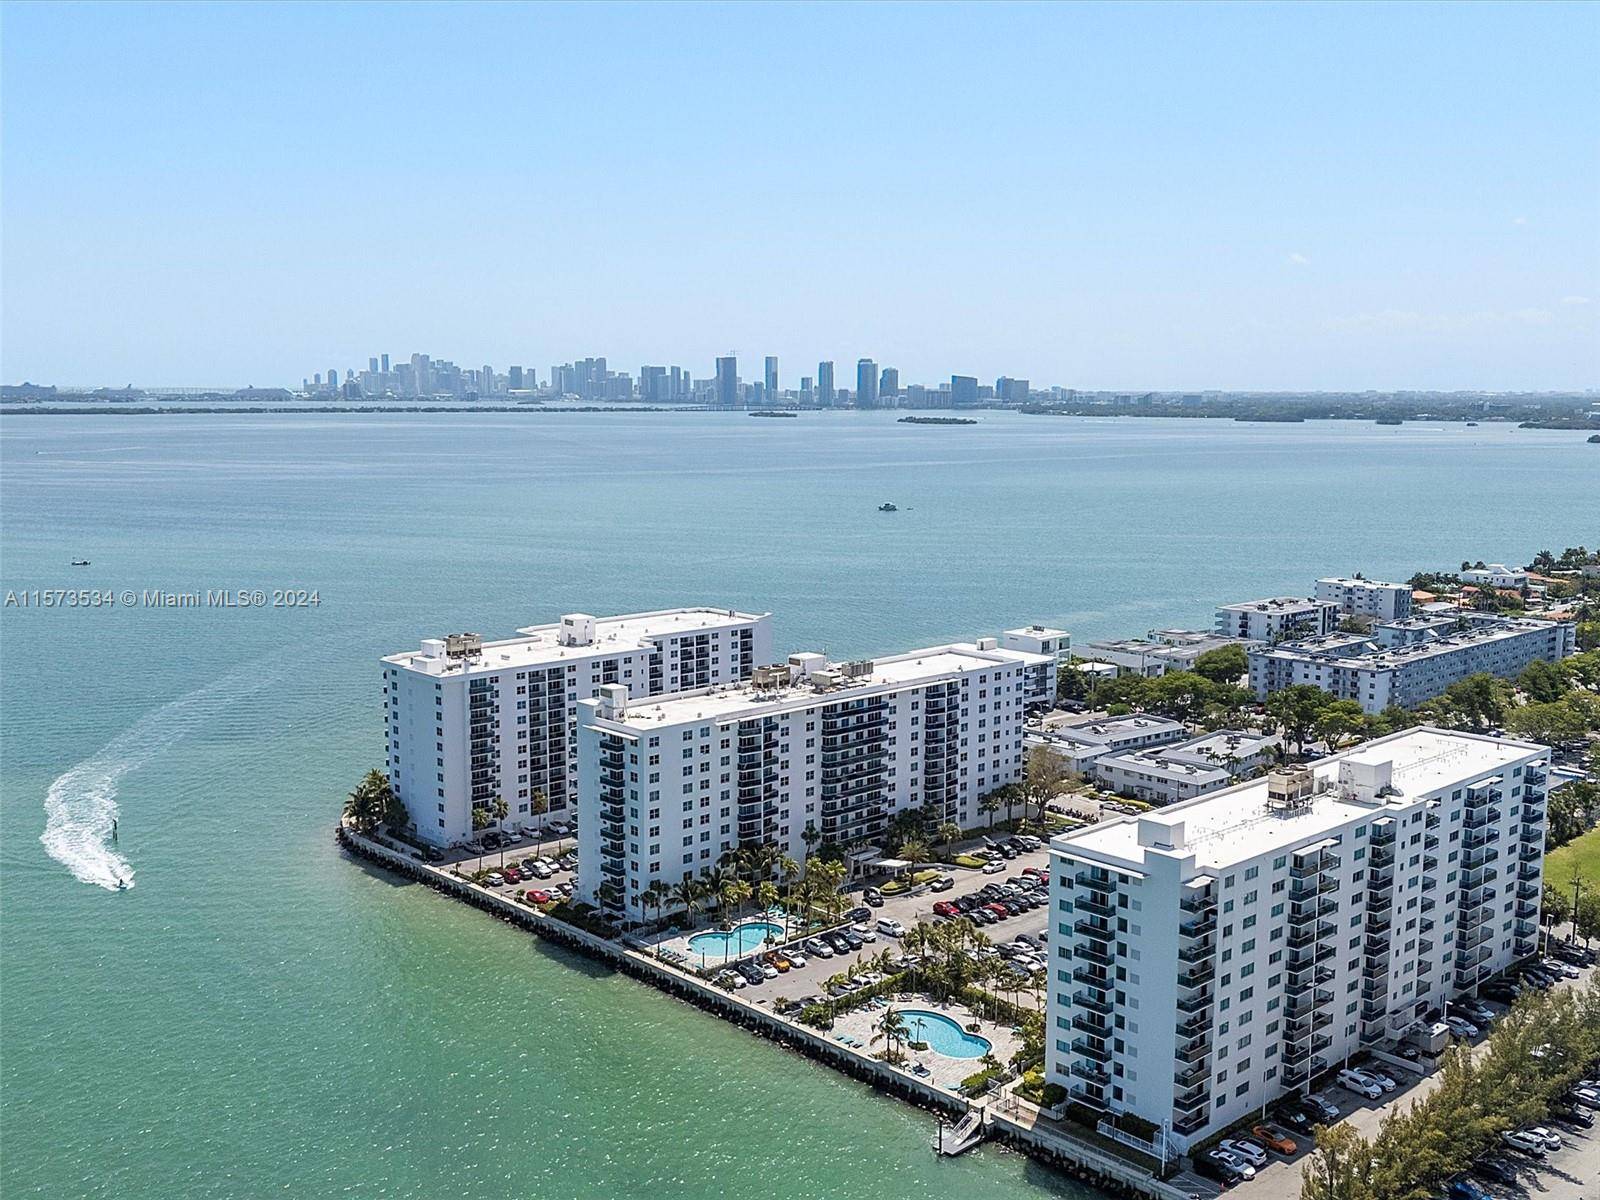 Discover luxury and tranquility in this stunning condo at Treasures on the Bay II.